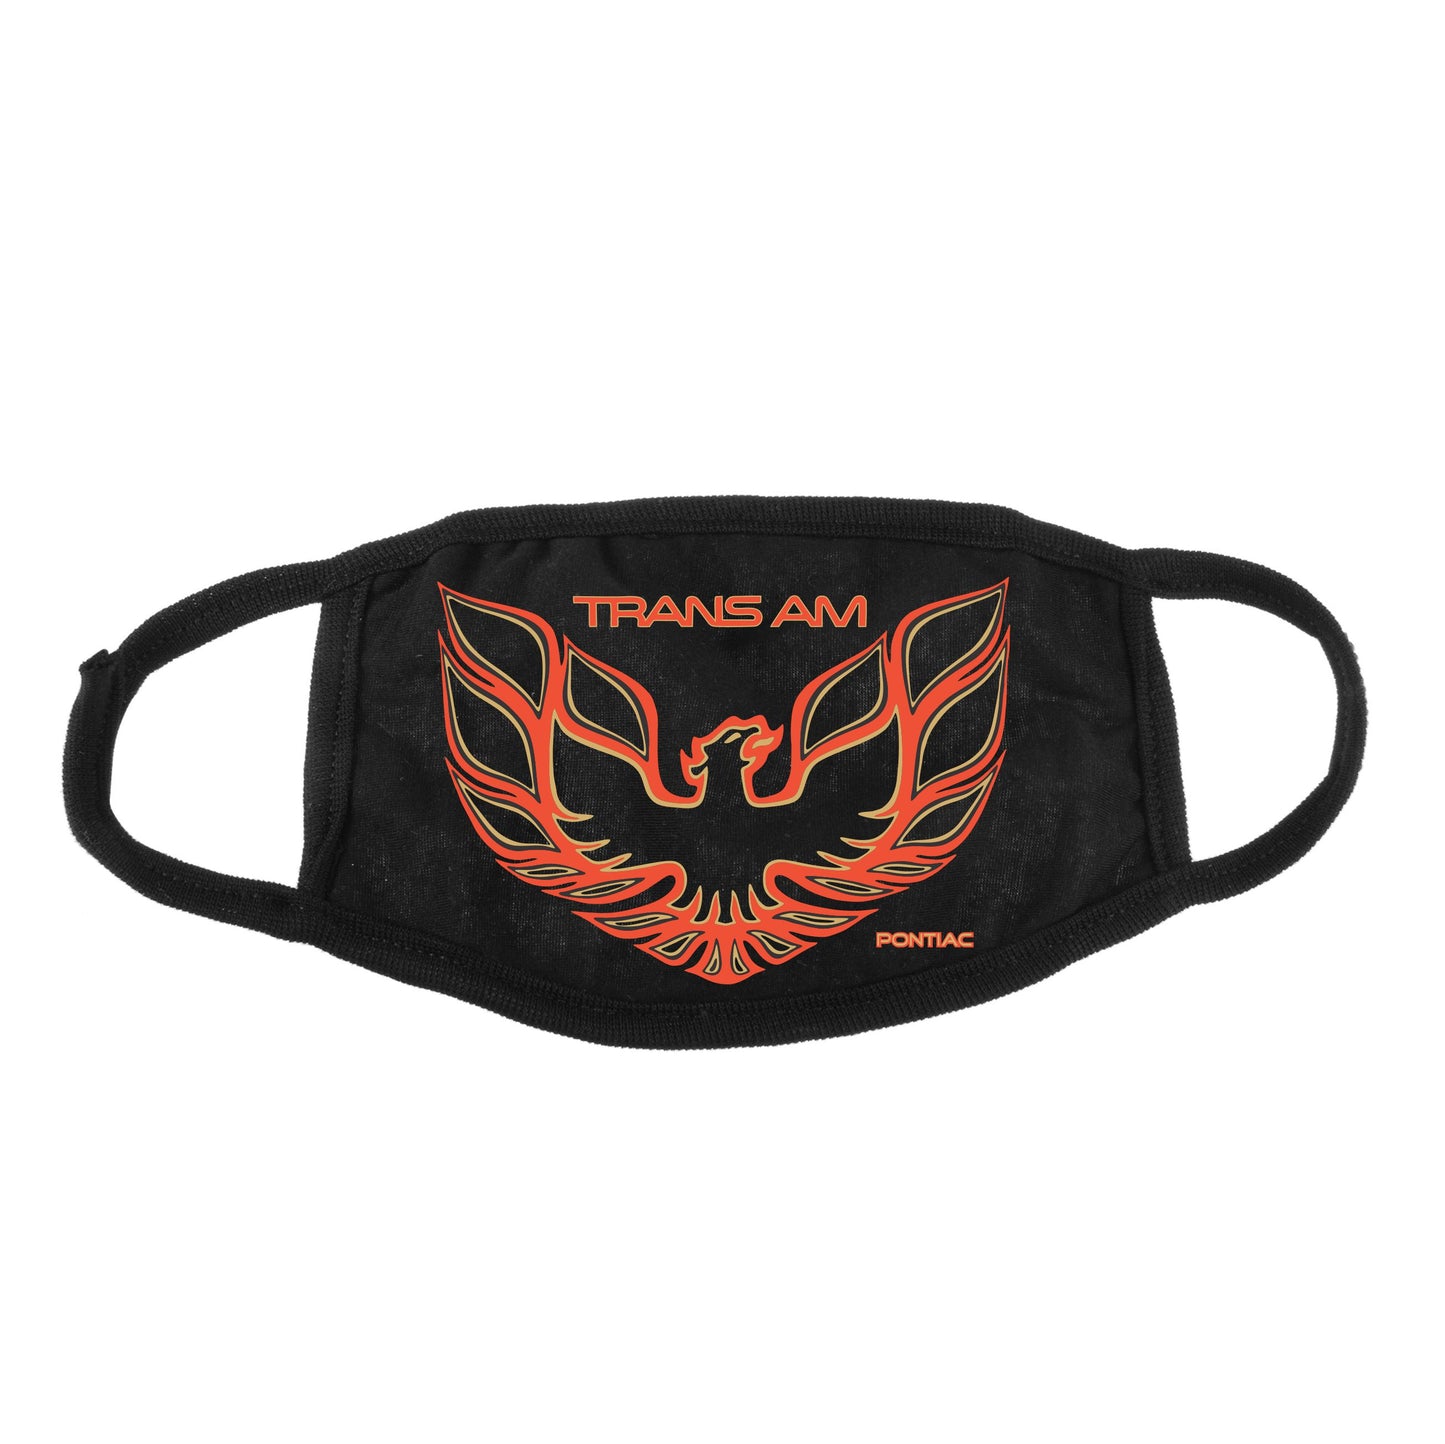 Trans Am Face Mask Protector